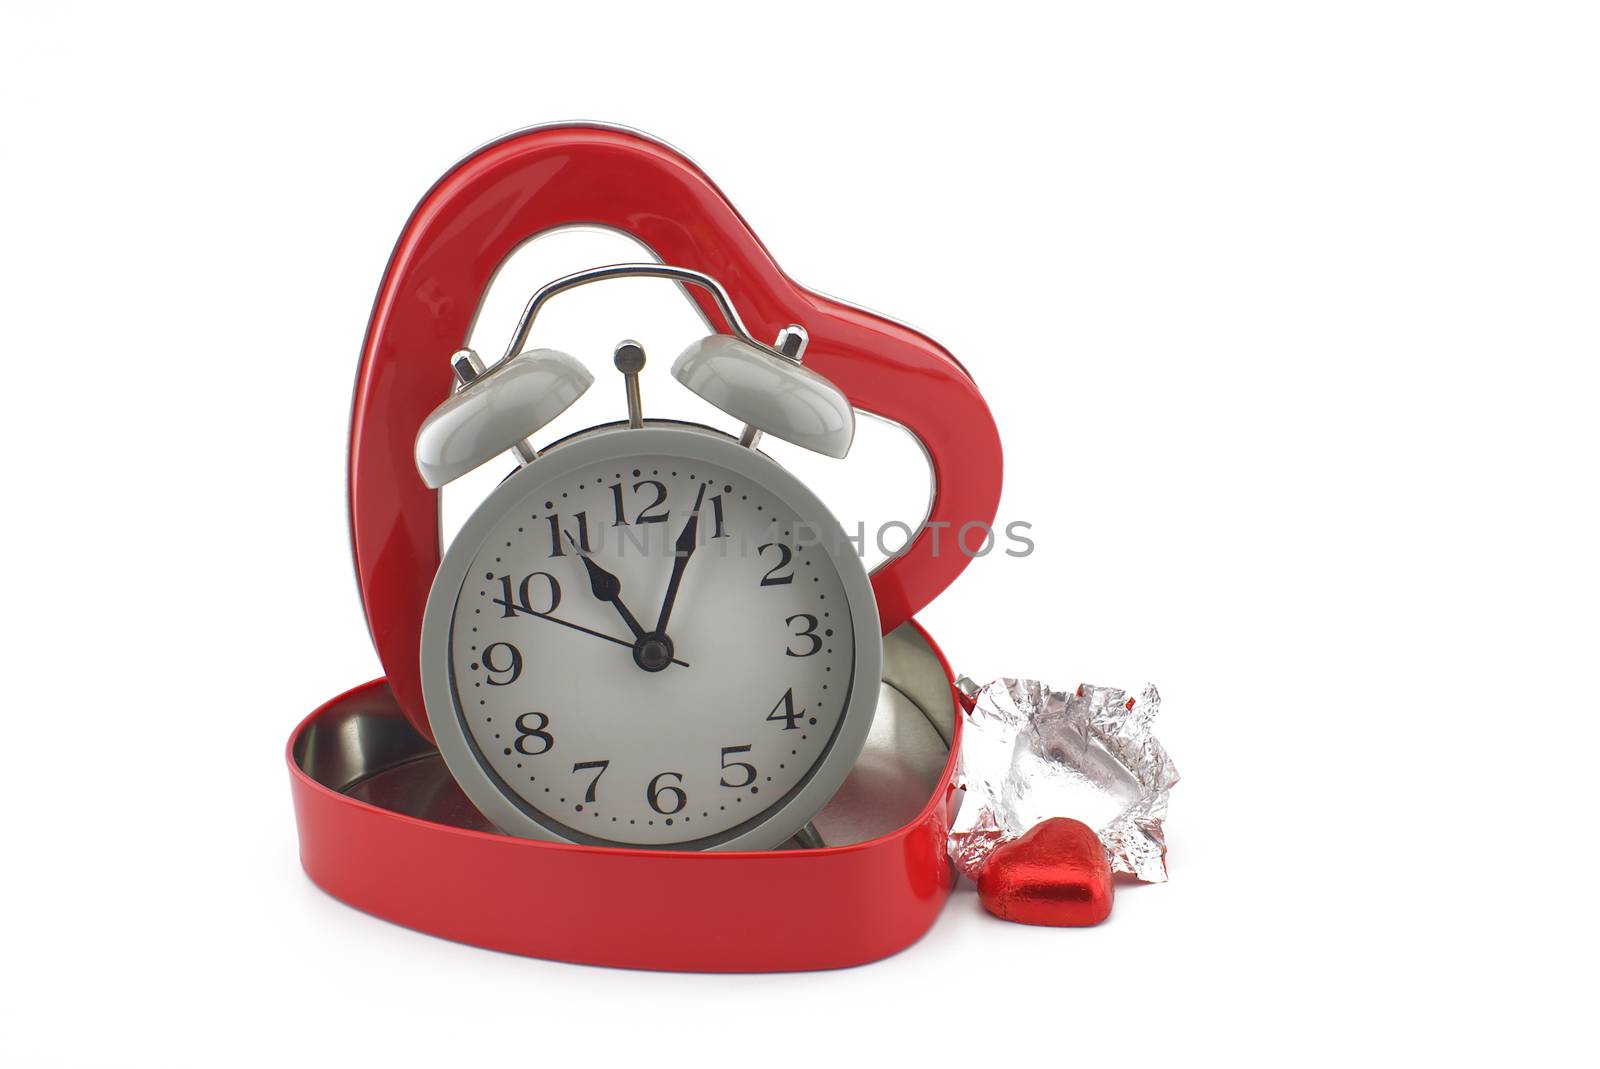 Retro alarm clock in a red heart shaped box with chocolate candy alongside on a white background with copyspace symbolic of love, togetherness and romance for Valentines